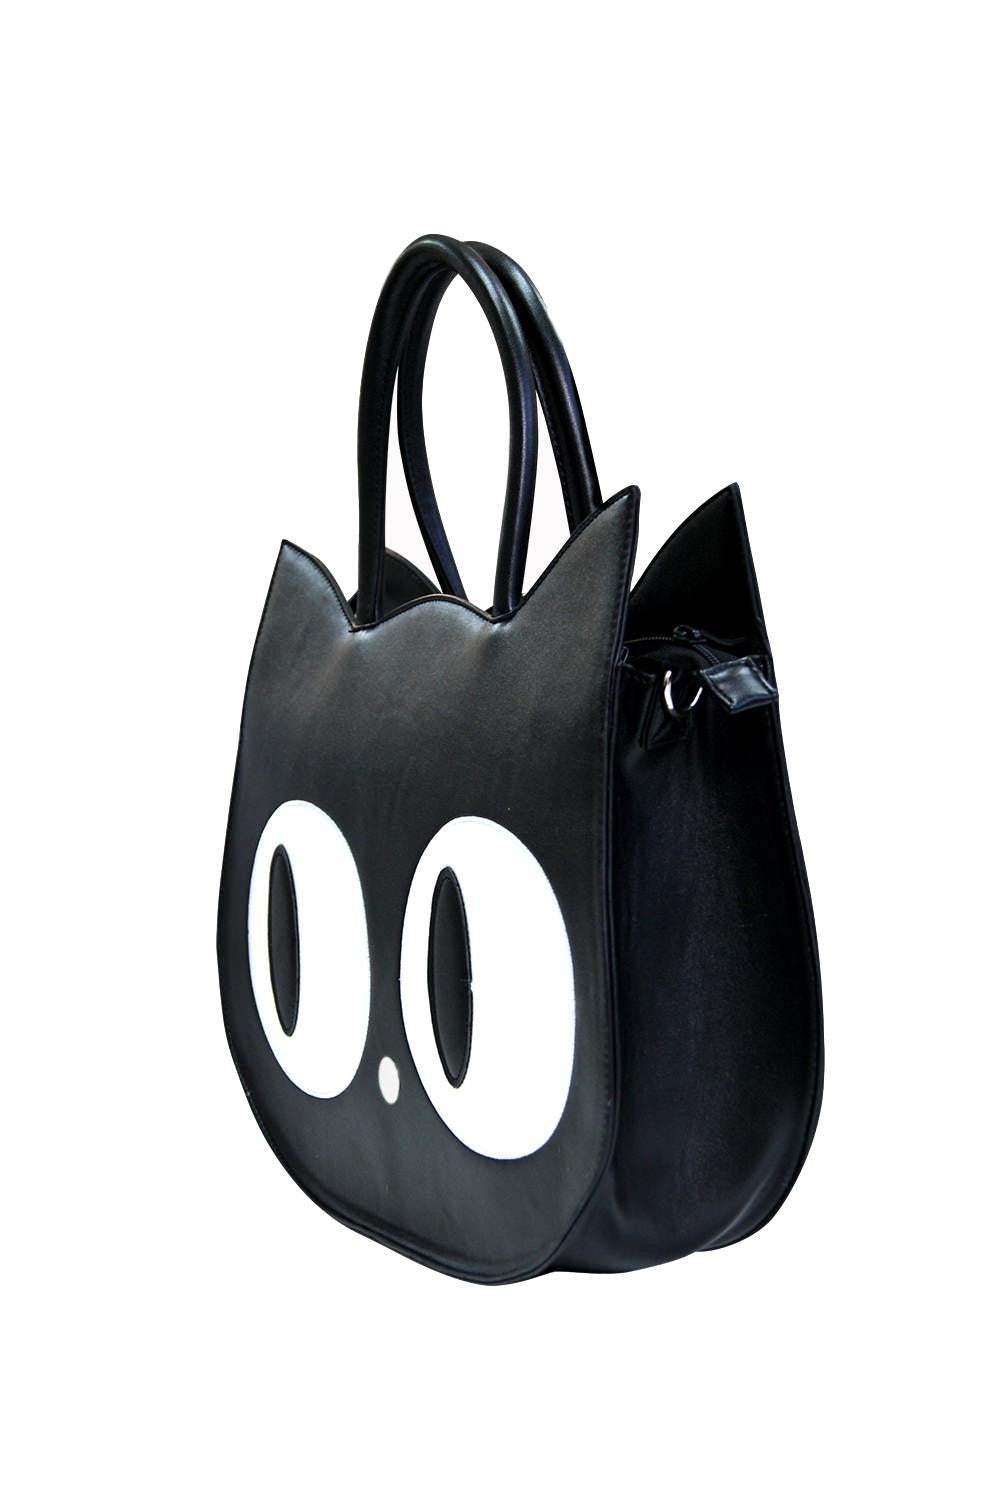 Banned Heart of Gold Very Large Cat Bag